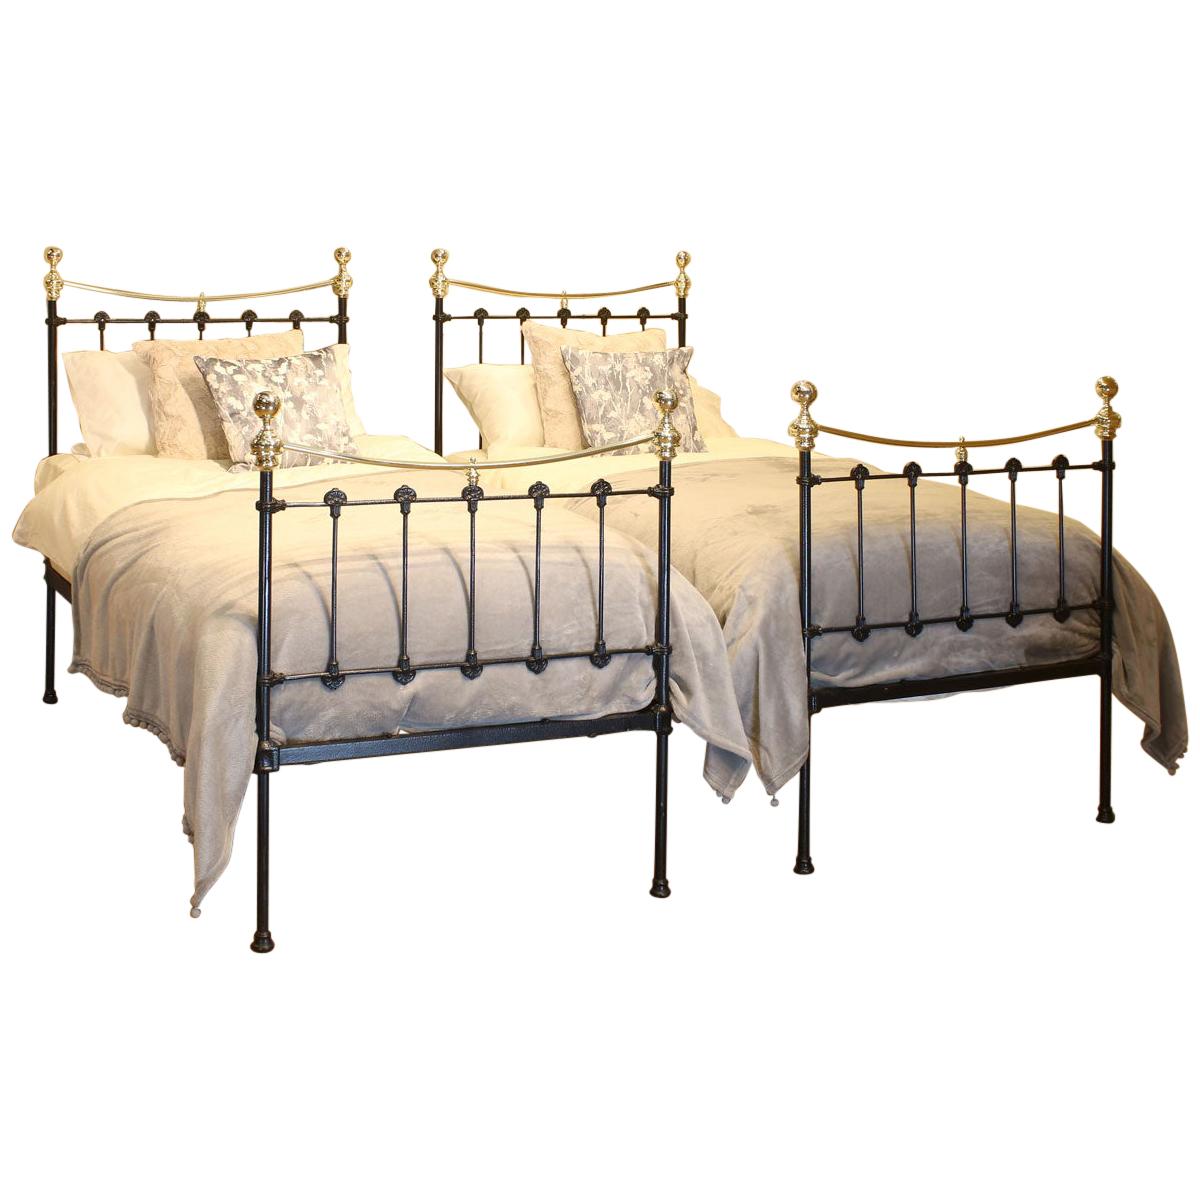 Matching Pair of Black Antique Beds MPS39